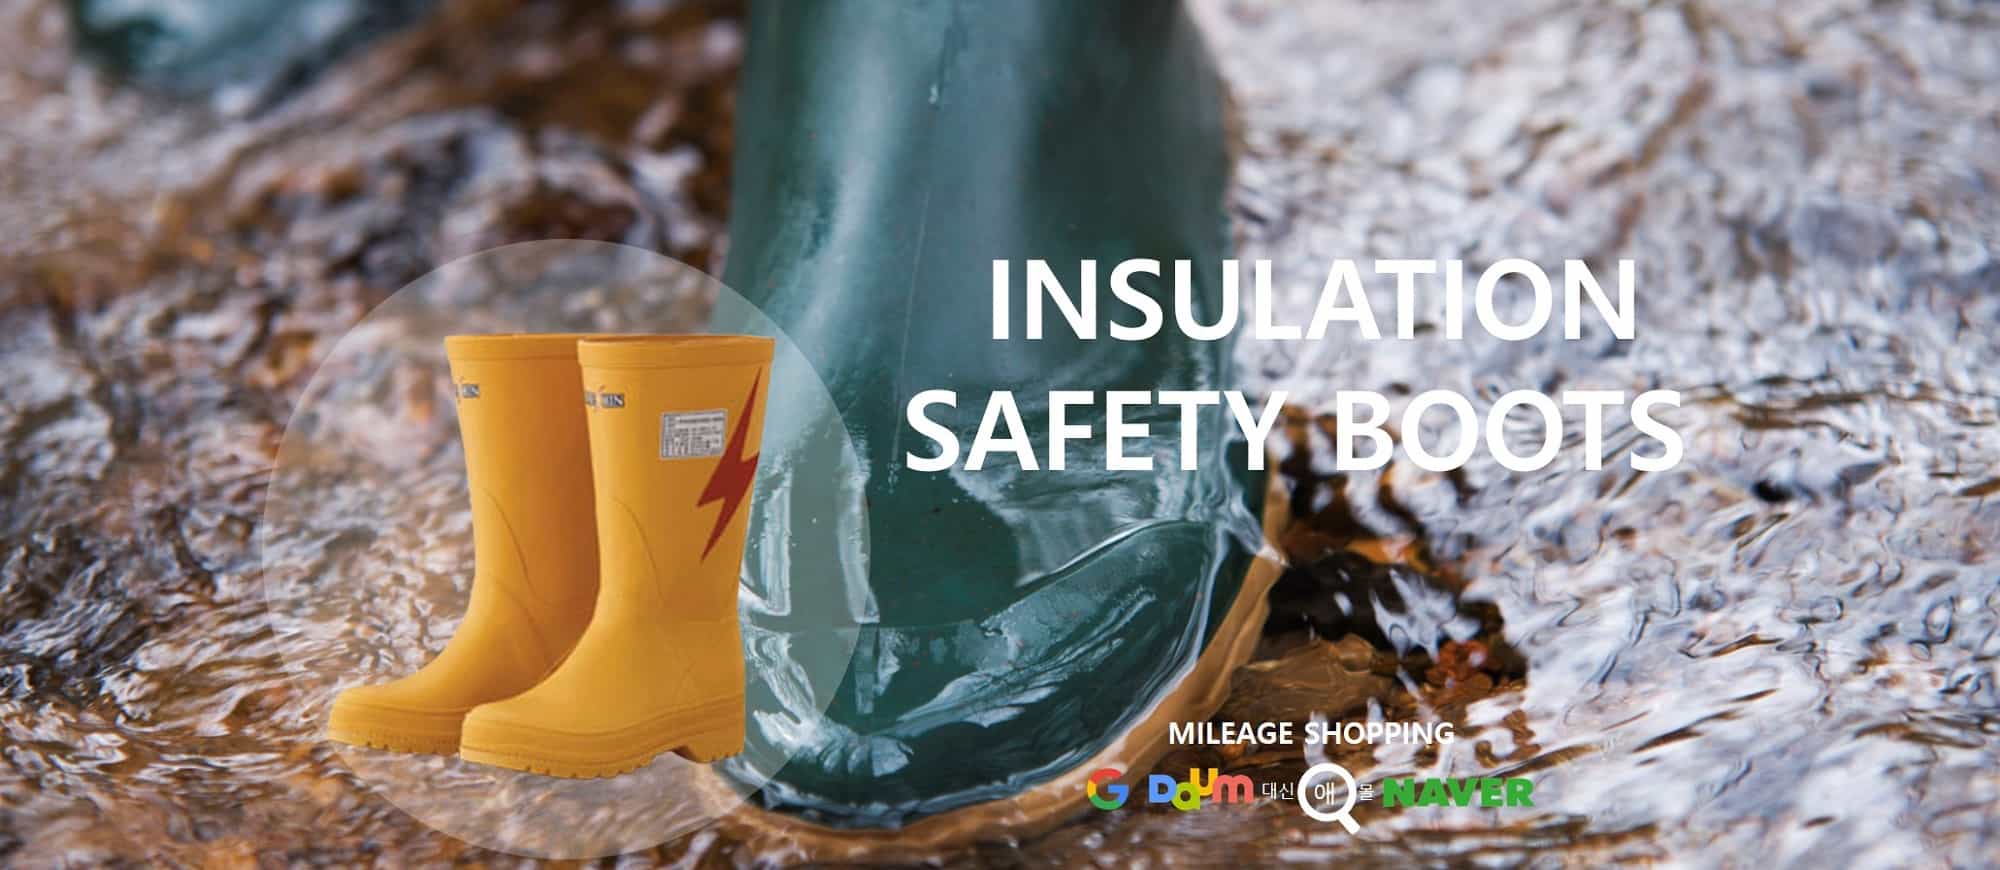 INSULATION SAFETY BOOTS